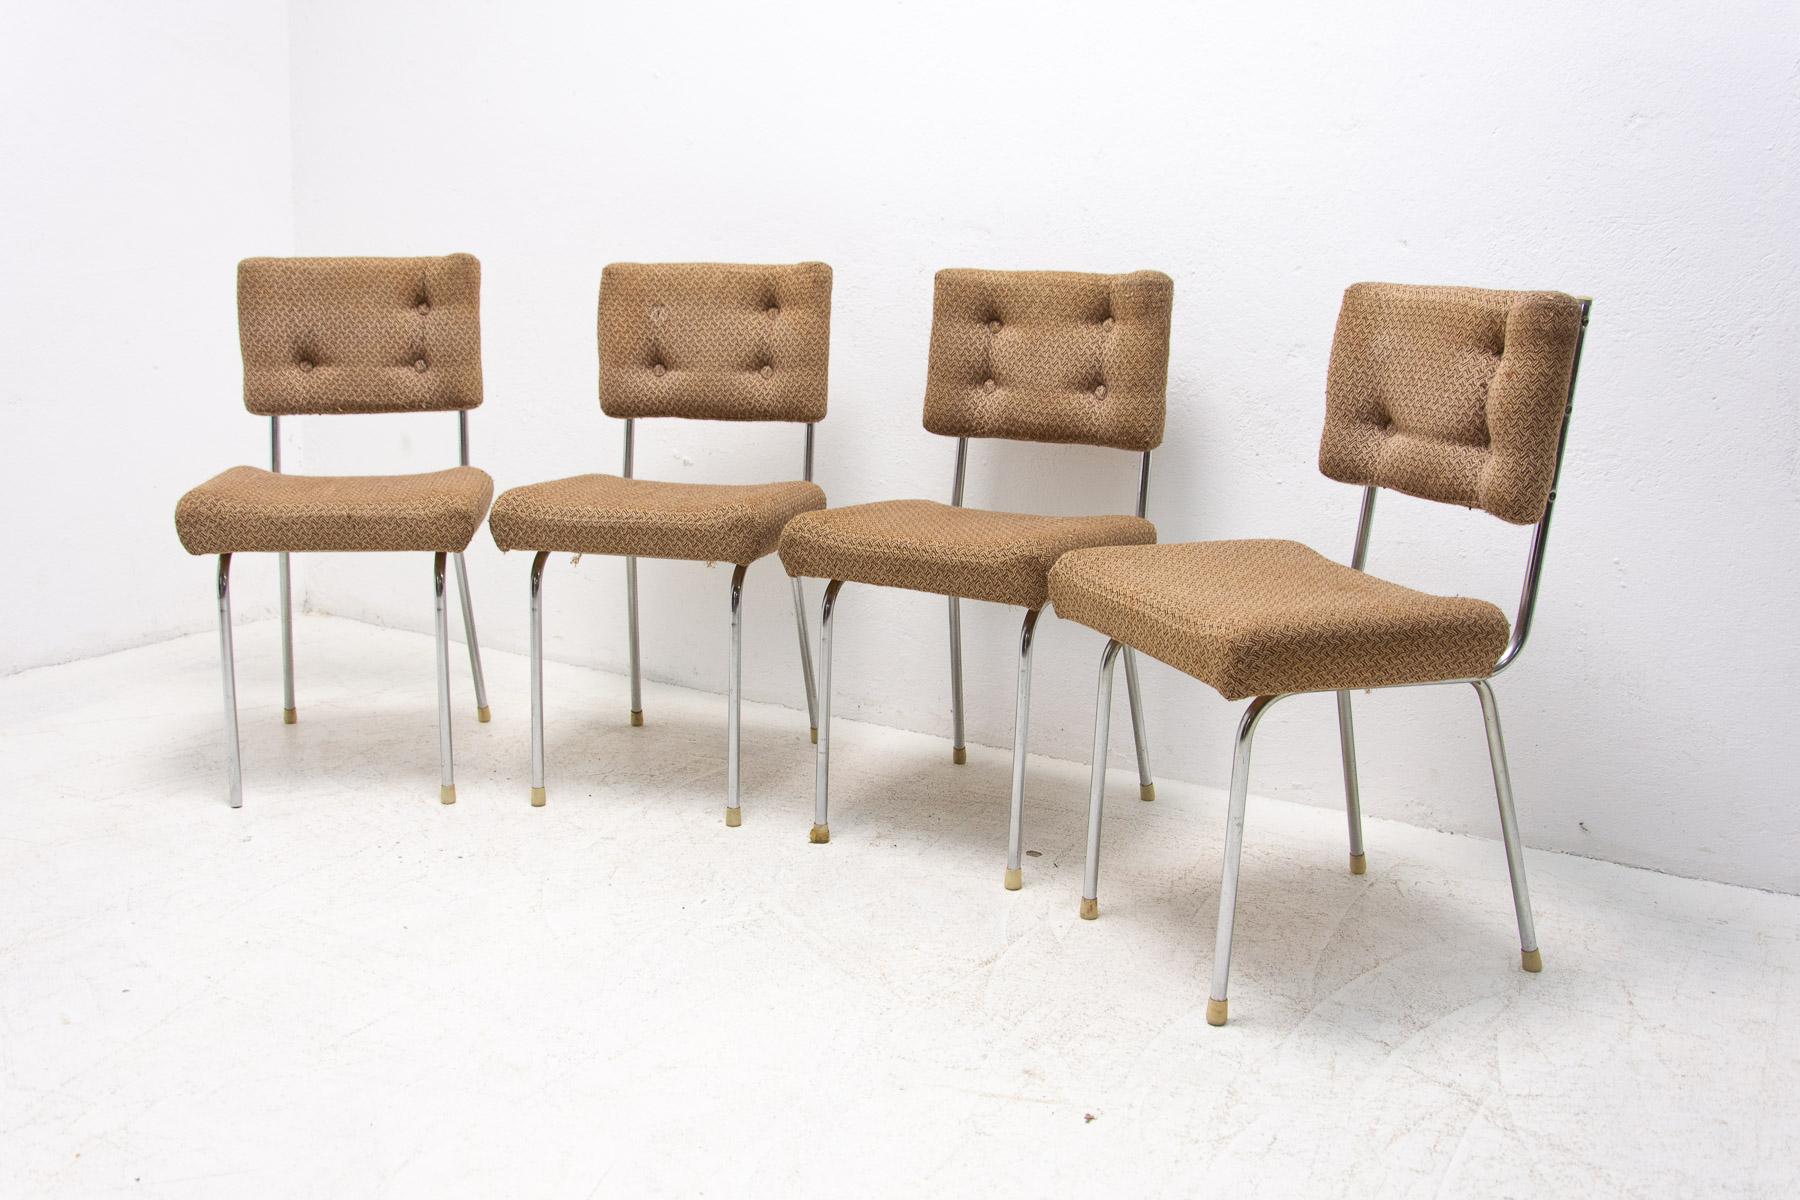 Eastern Bloc Midcentury Chromed Cafe Chairs, 1960's In Good Condition For Sale In Prague 8, CZ